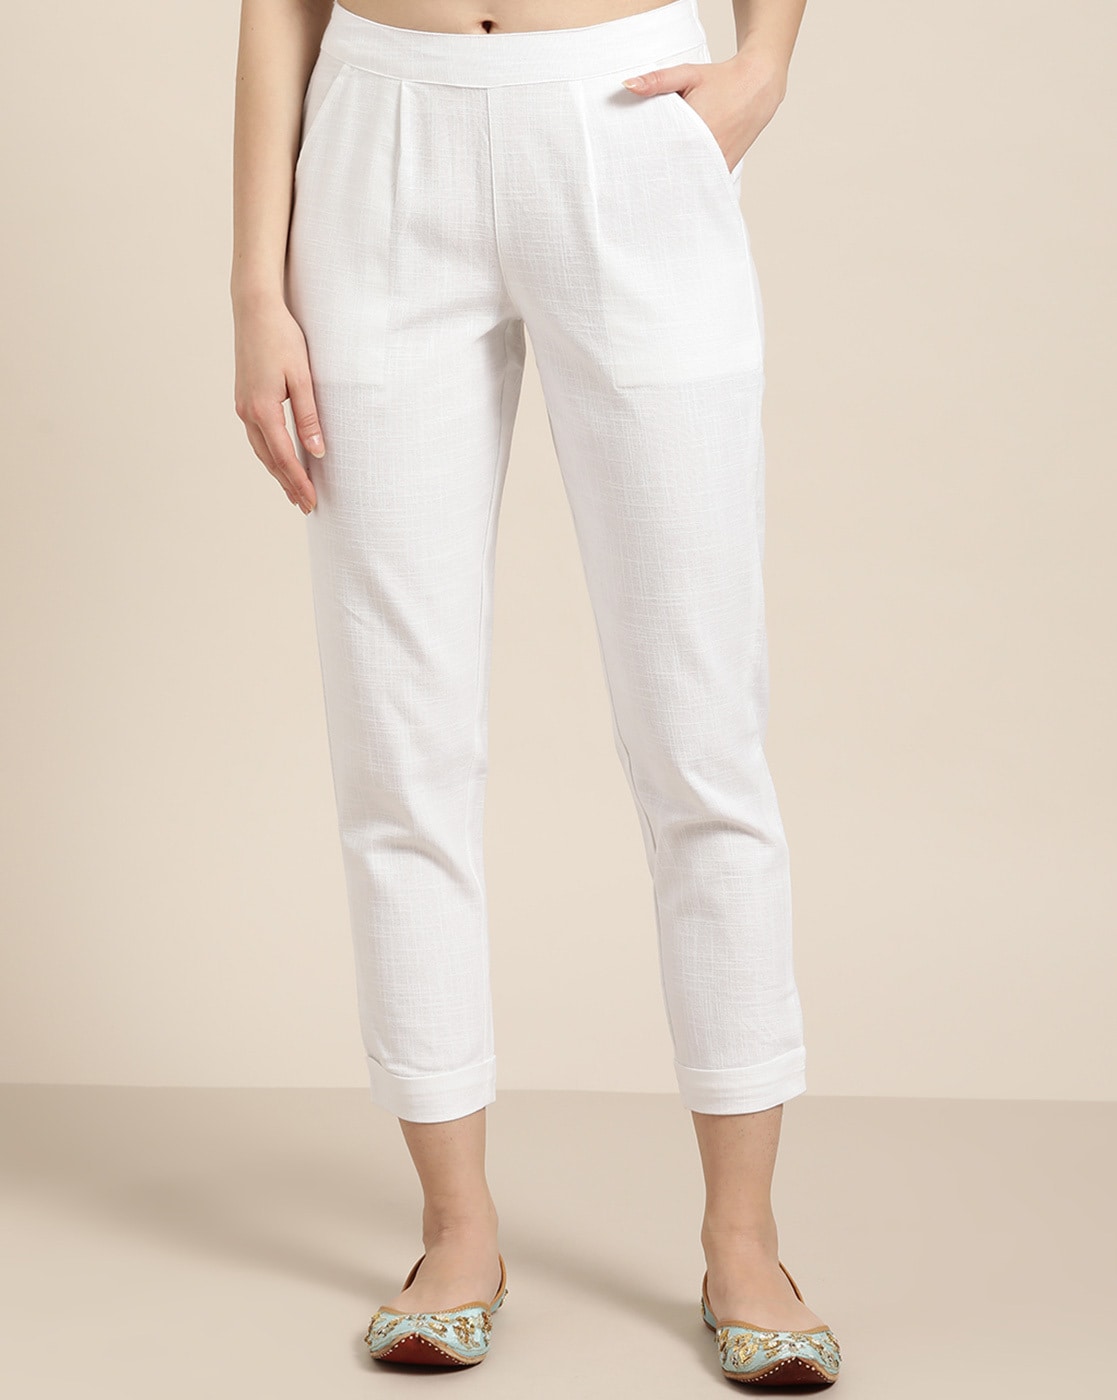 Buy Online Off White Cotton Pants for Women  Girls at Best Prices in Biba  IndiaBOTTOMW14910SS21OWH